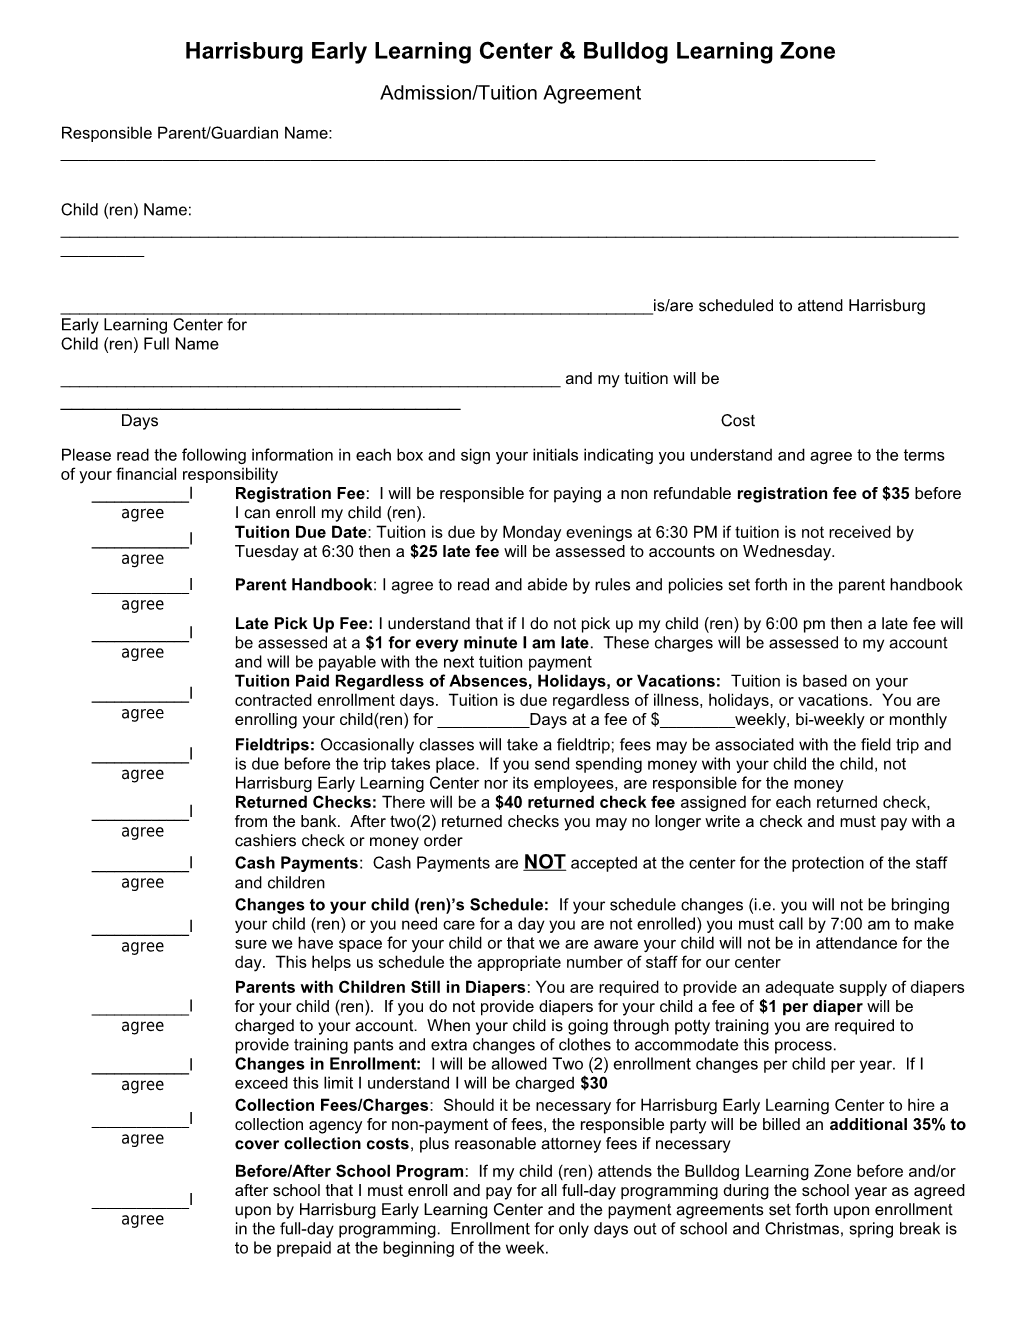 Harrisburg Early Learning Center Tuition / Admission Agreement and Contract